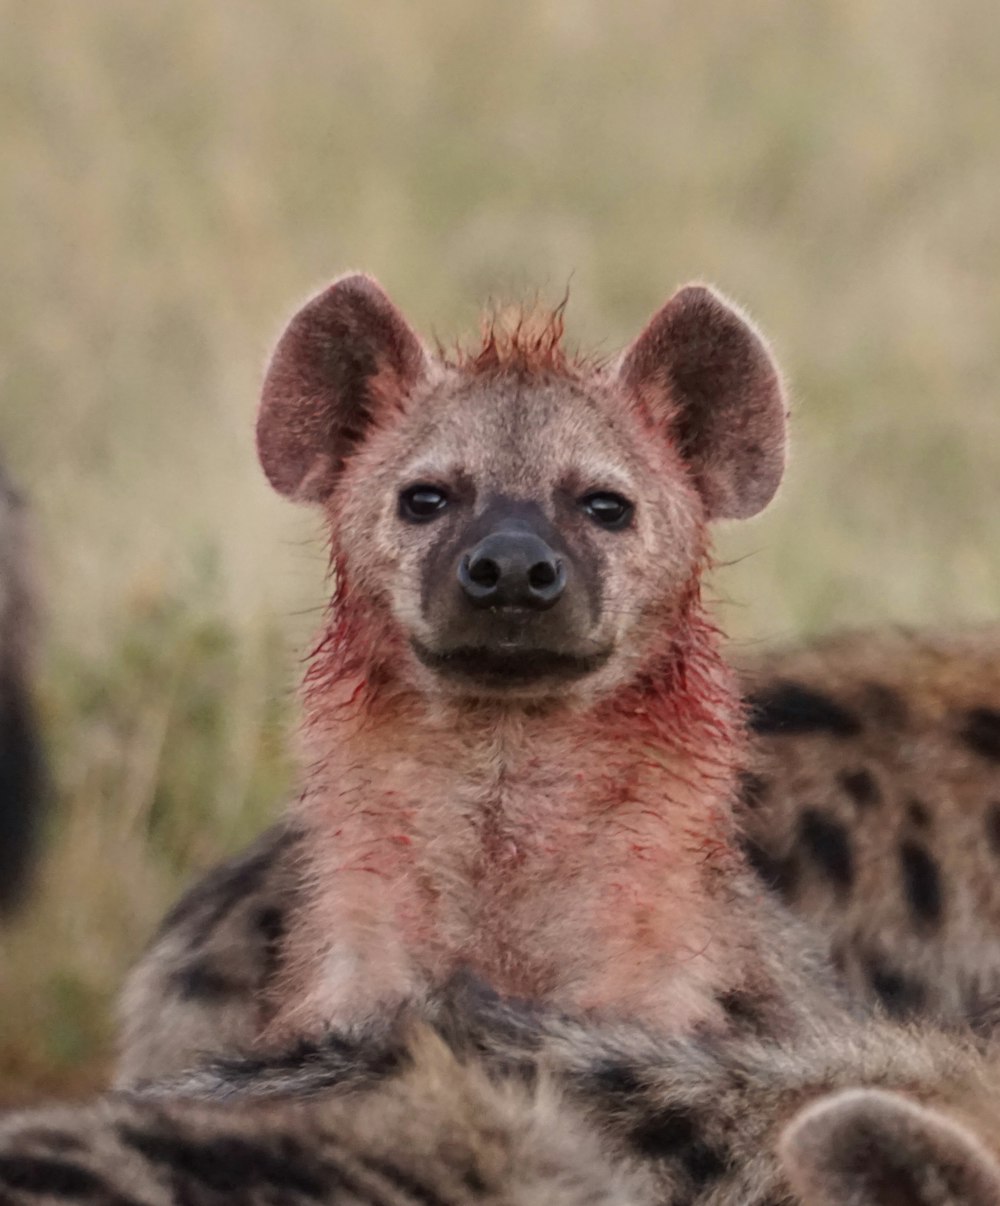 a close up of a hyena with blood on it's face